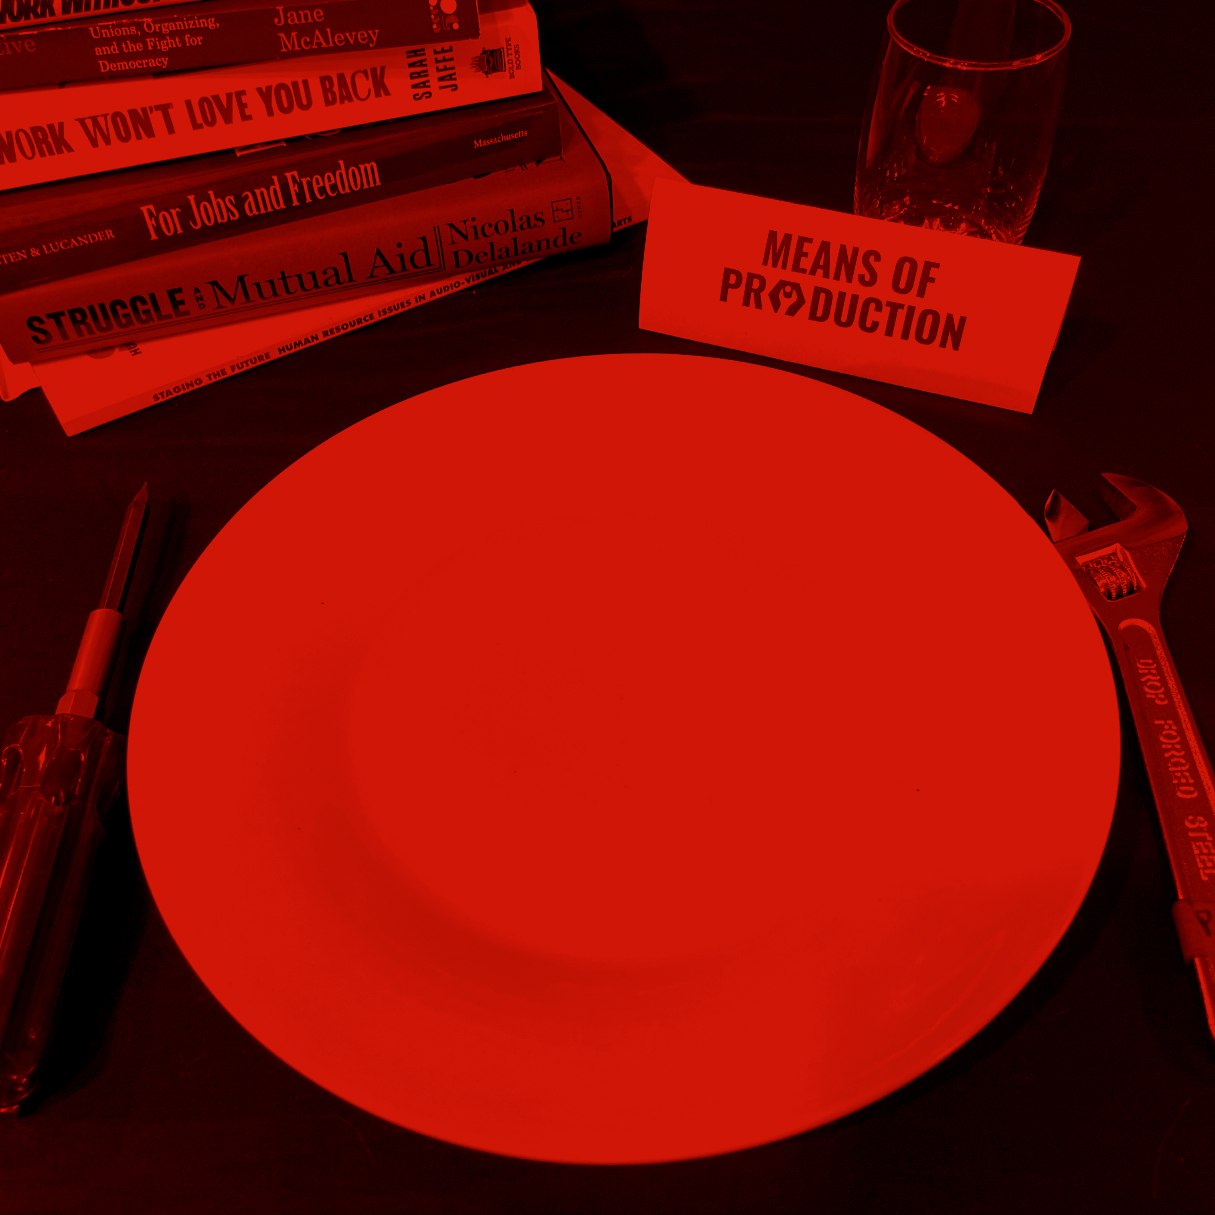 A place setting is laid out on a black tablecloth. The setting includes an empty white plate, tools in the place of silverware, a stack of books, a water glass, and a placecard labelled 